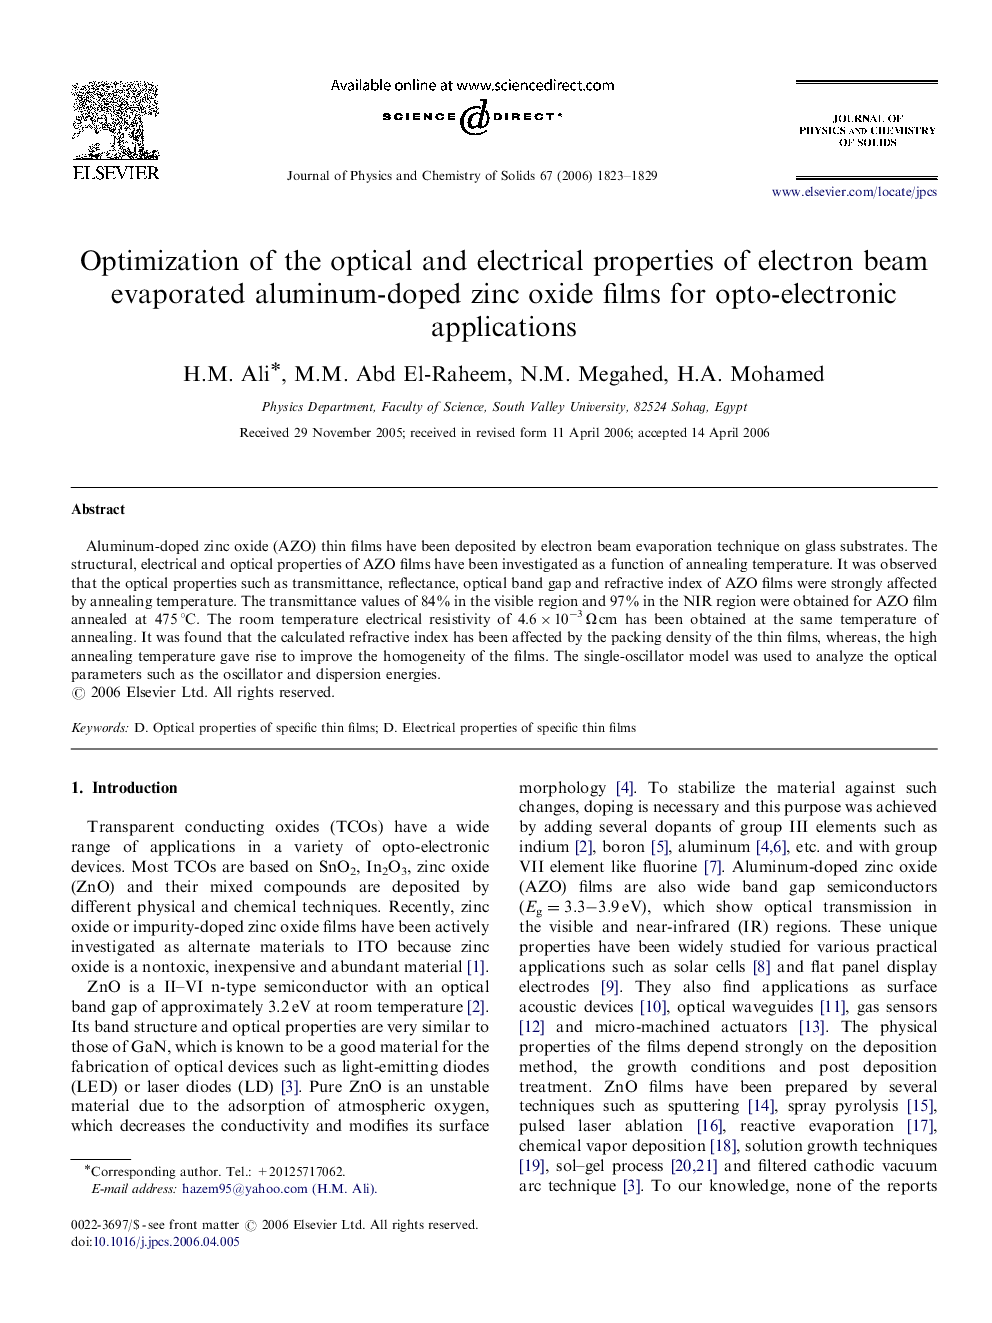 Optimization of the optical and electrical properties of electron beam evaporated aluminum-doped zinc oxide films for opto-electronic applications